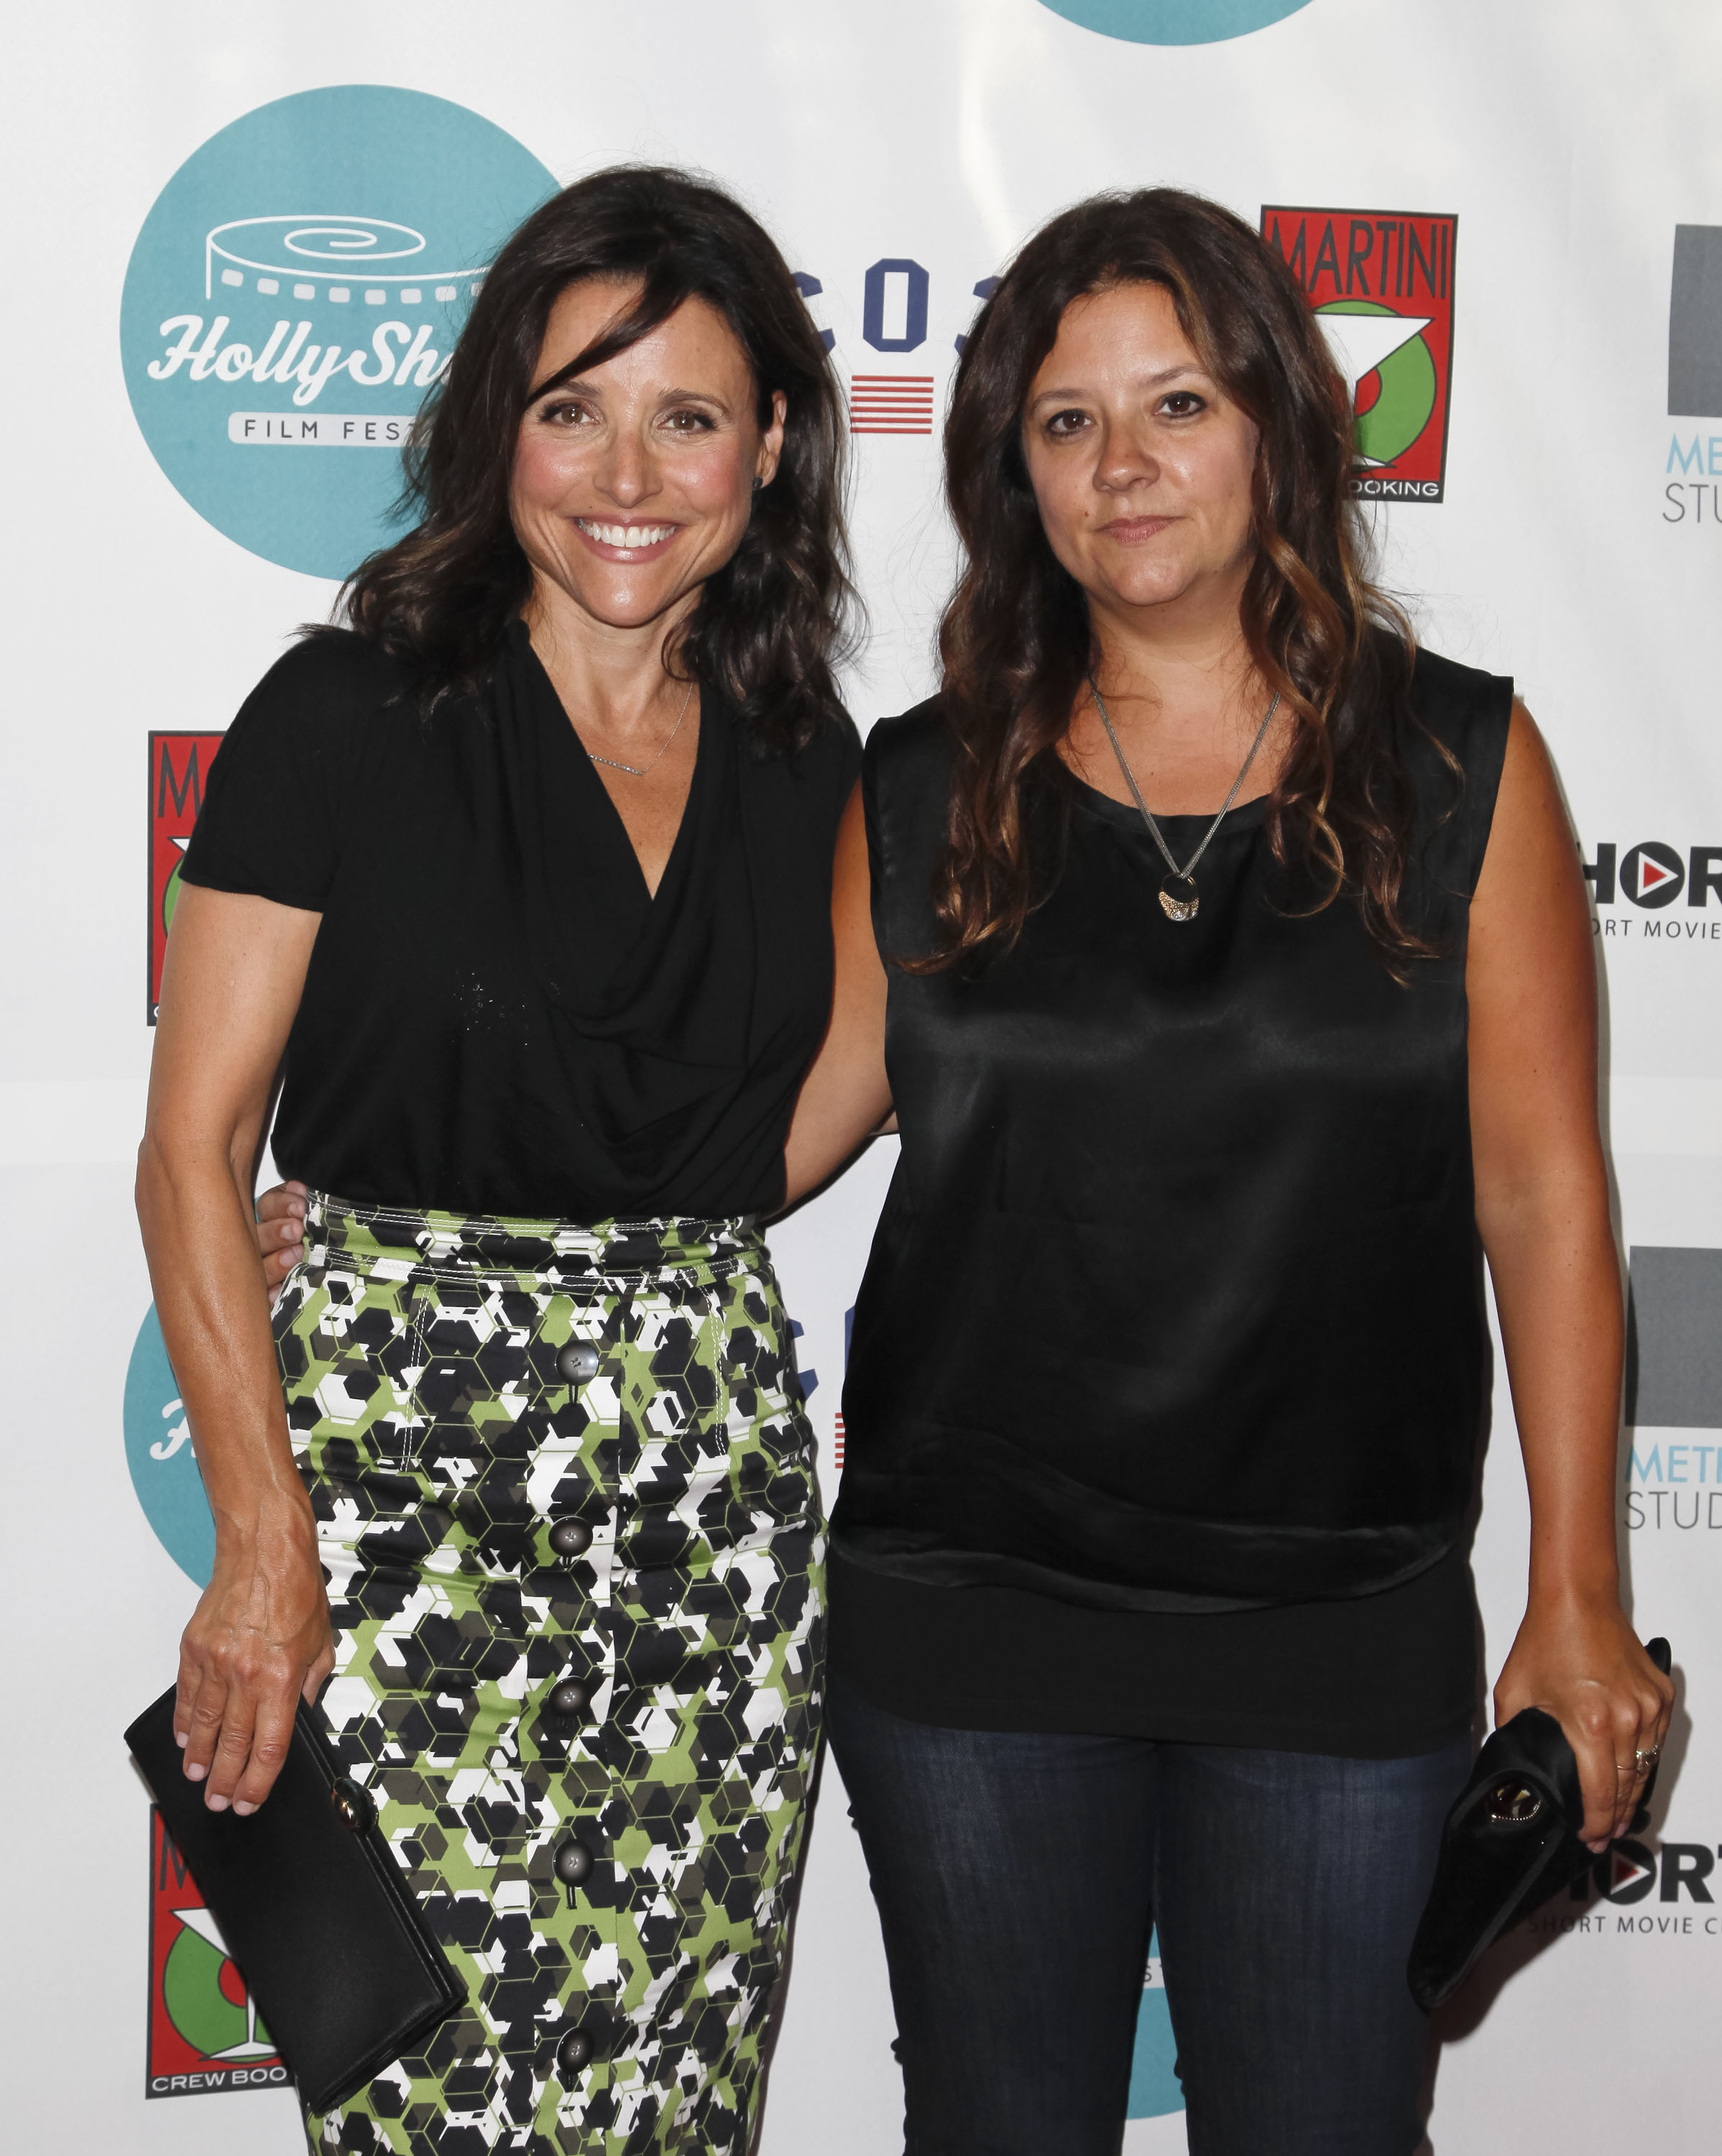 From left: Julia Louis Dreyfus and Stephanie Laing at TCL Chinese Theatre on August 14, 2014 in Hollywood, California.